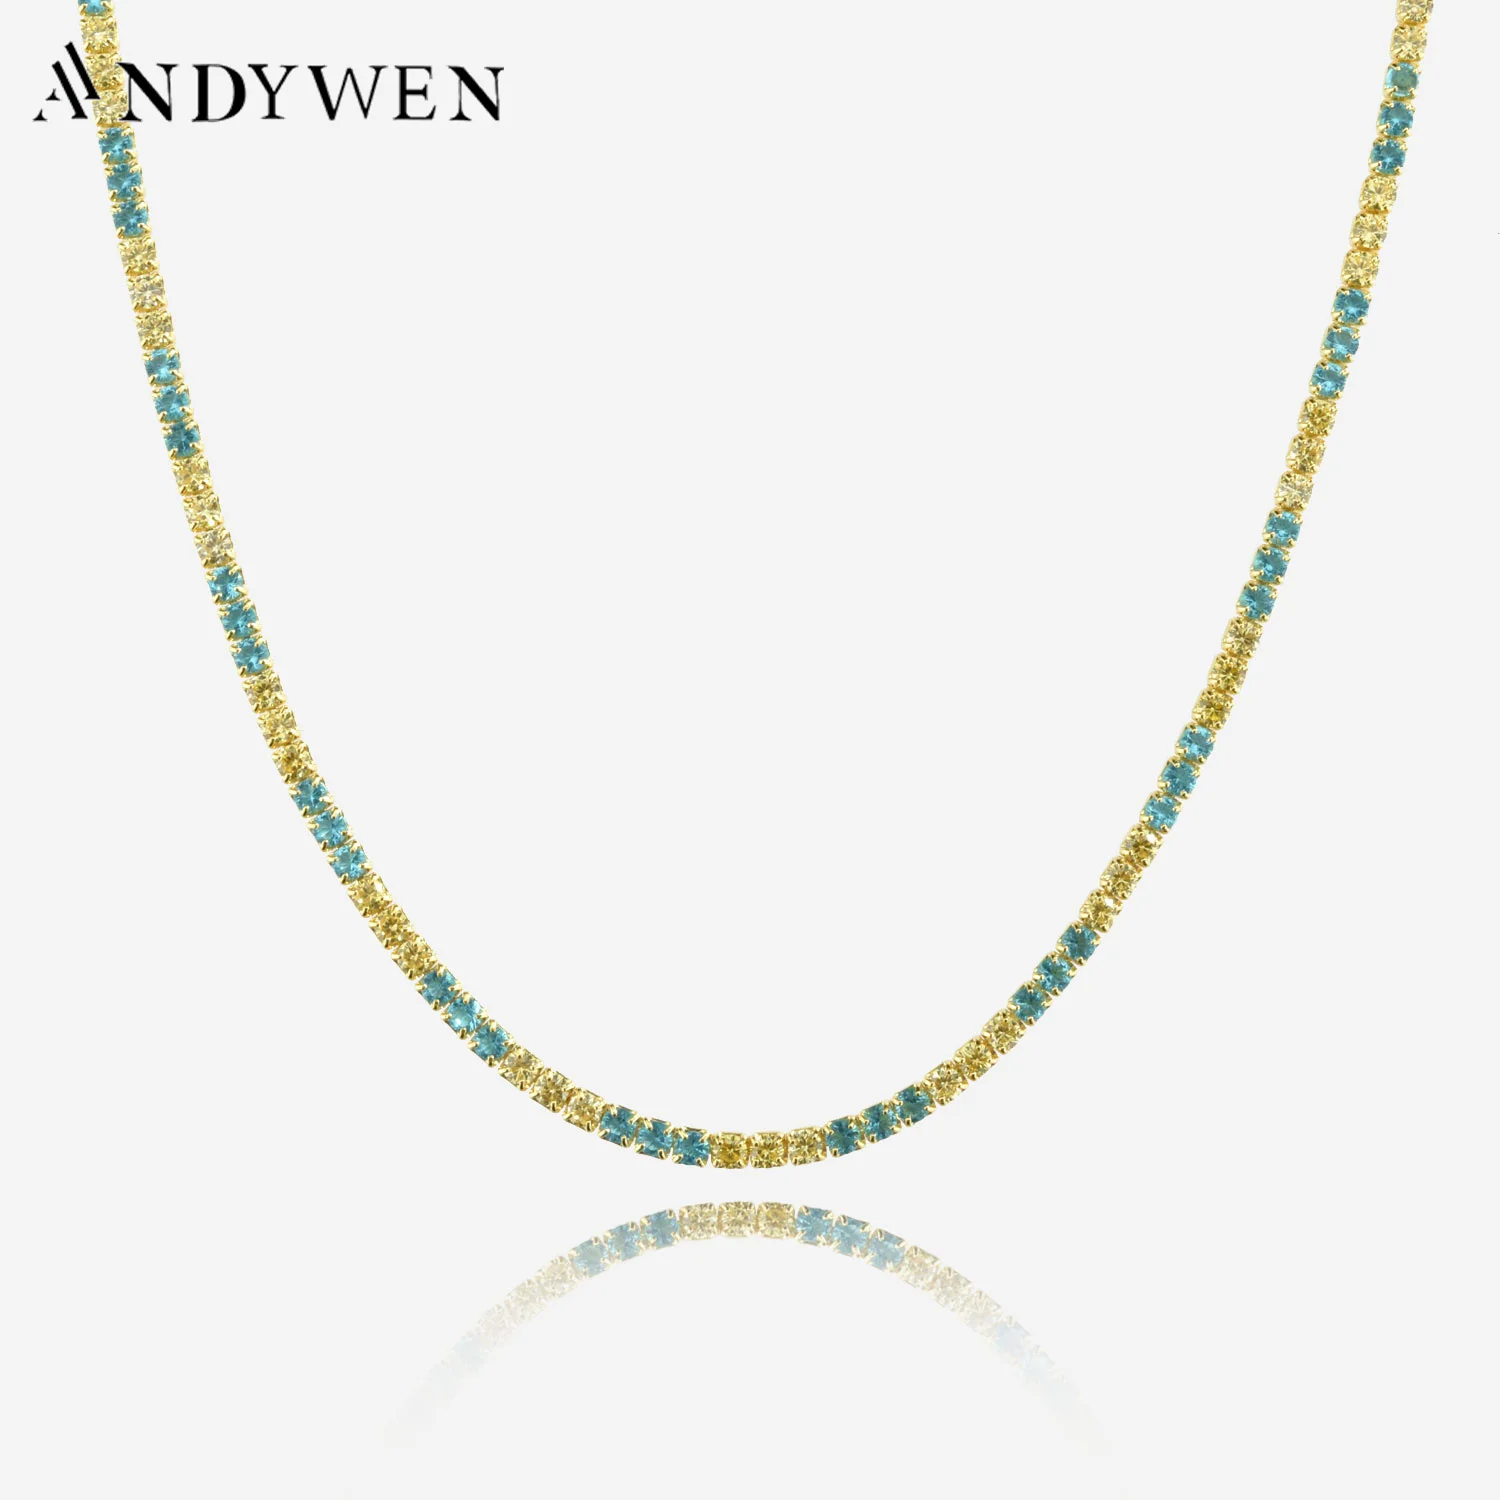 ANDYWEN 925 Sterling Silver Gold Yellow Blue Zircon CZ 2mm Tennis Chain Choker Necklace Women Party Birthday Gift Free Shipping